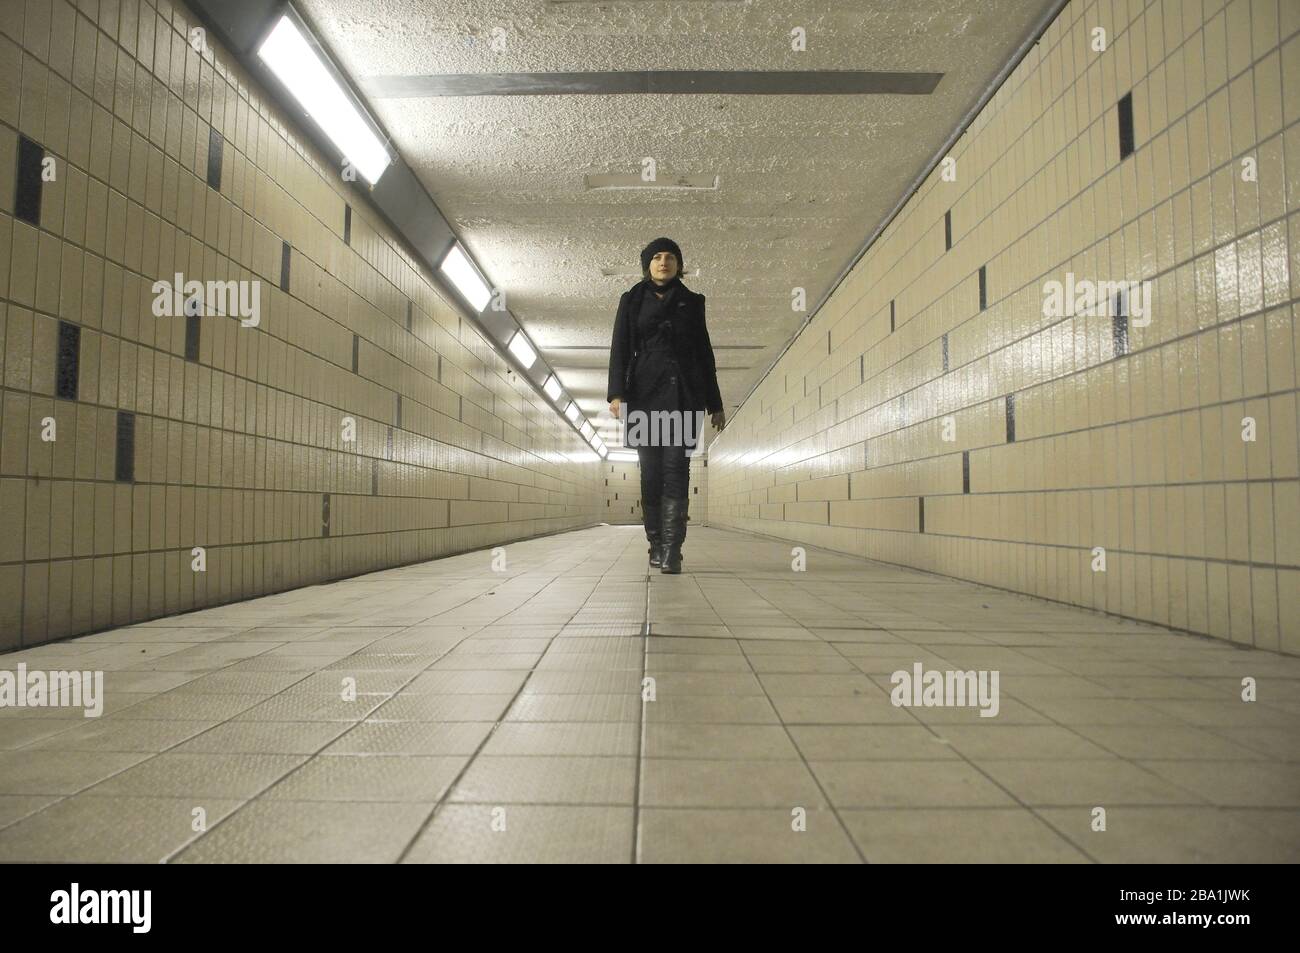 Young Adult Woman Walking through Underground Pedestrian Tunnel Stock Photo